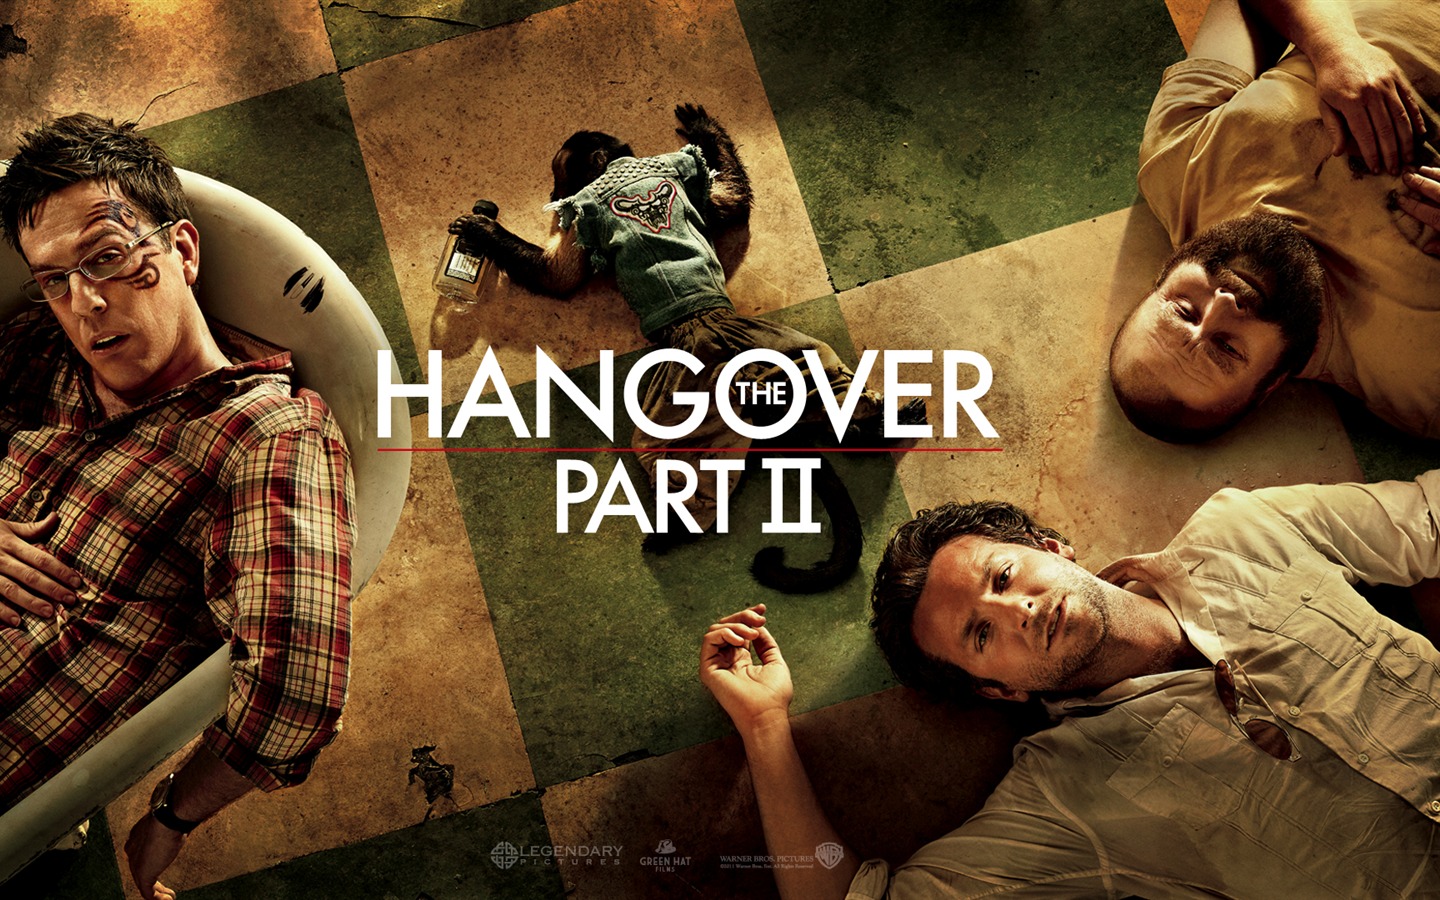 The Hangover Part II wallpapers #1 - 1440x900